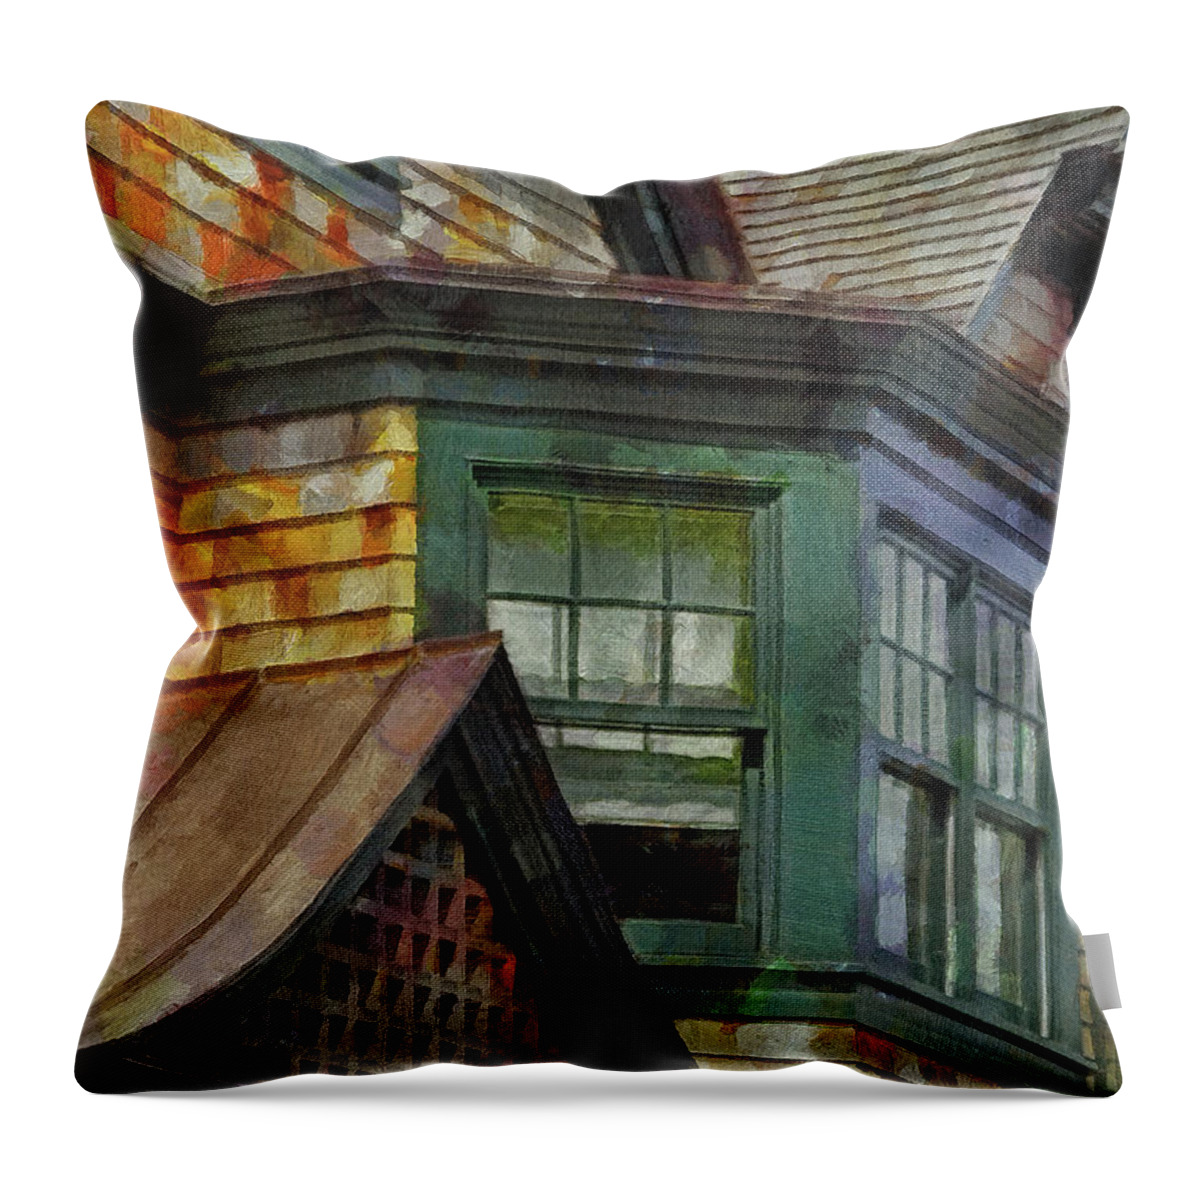 Architectural Abstract Art Throw Pillow featuring the mixed media 307 Architecture Abstract Art New England House Gables Shingles Windows, Newport, Rhode Island by Richard Neuman Architectural Gifts